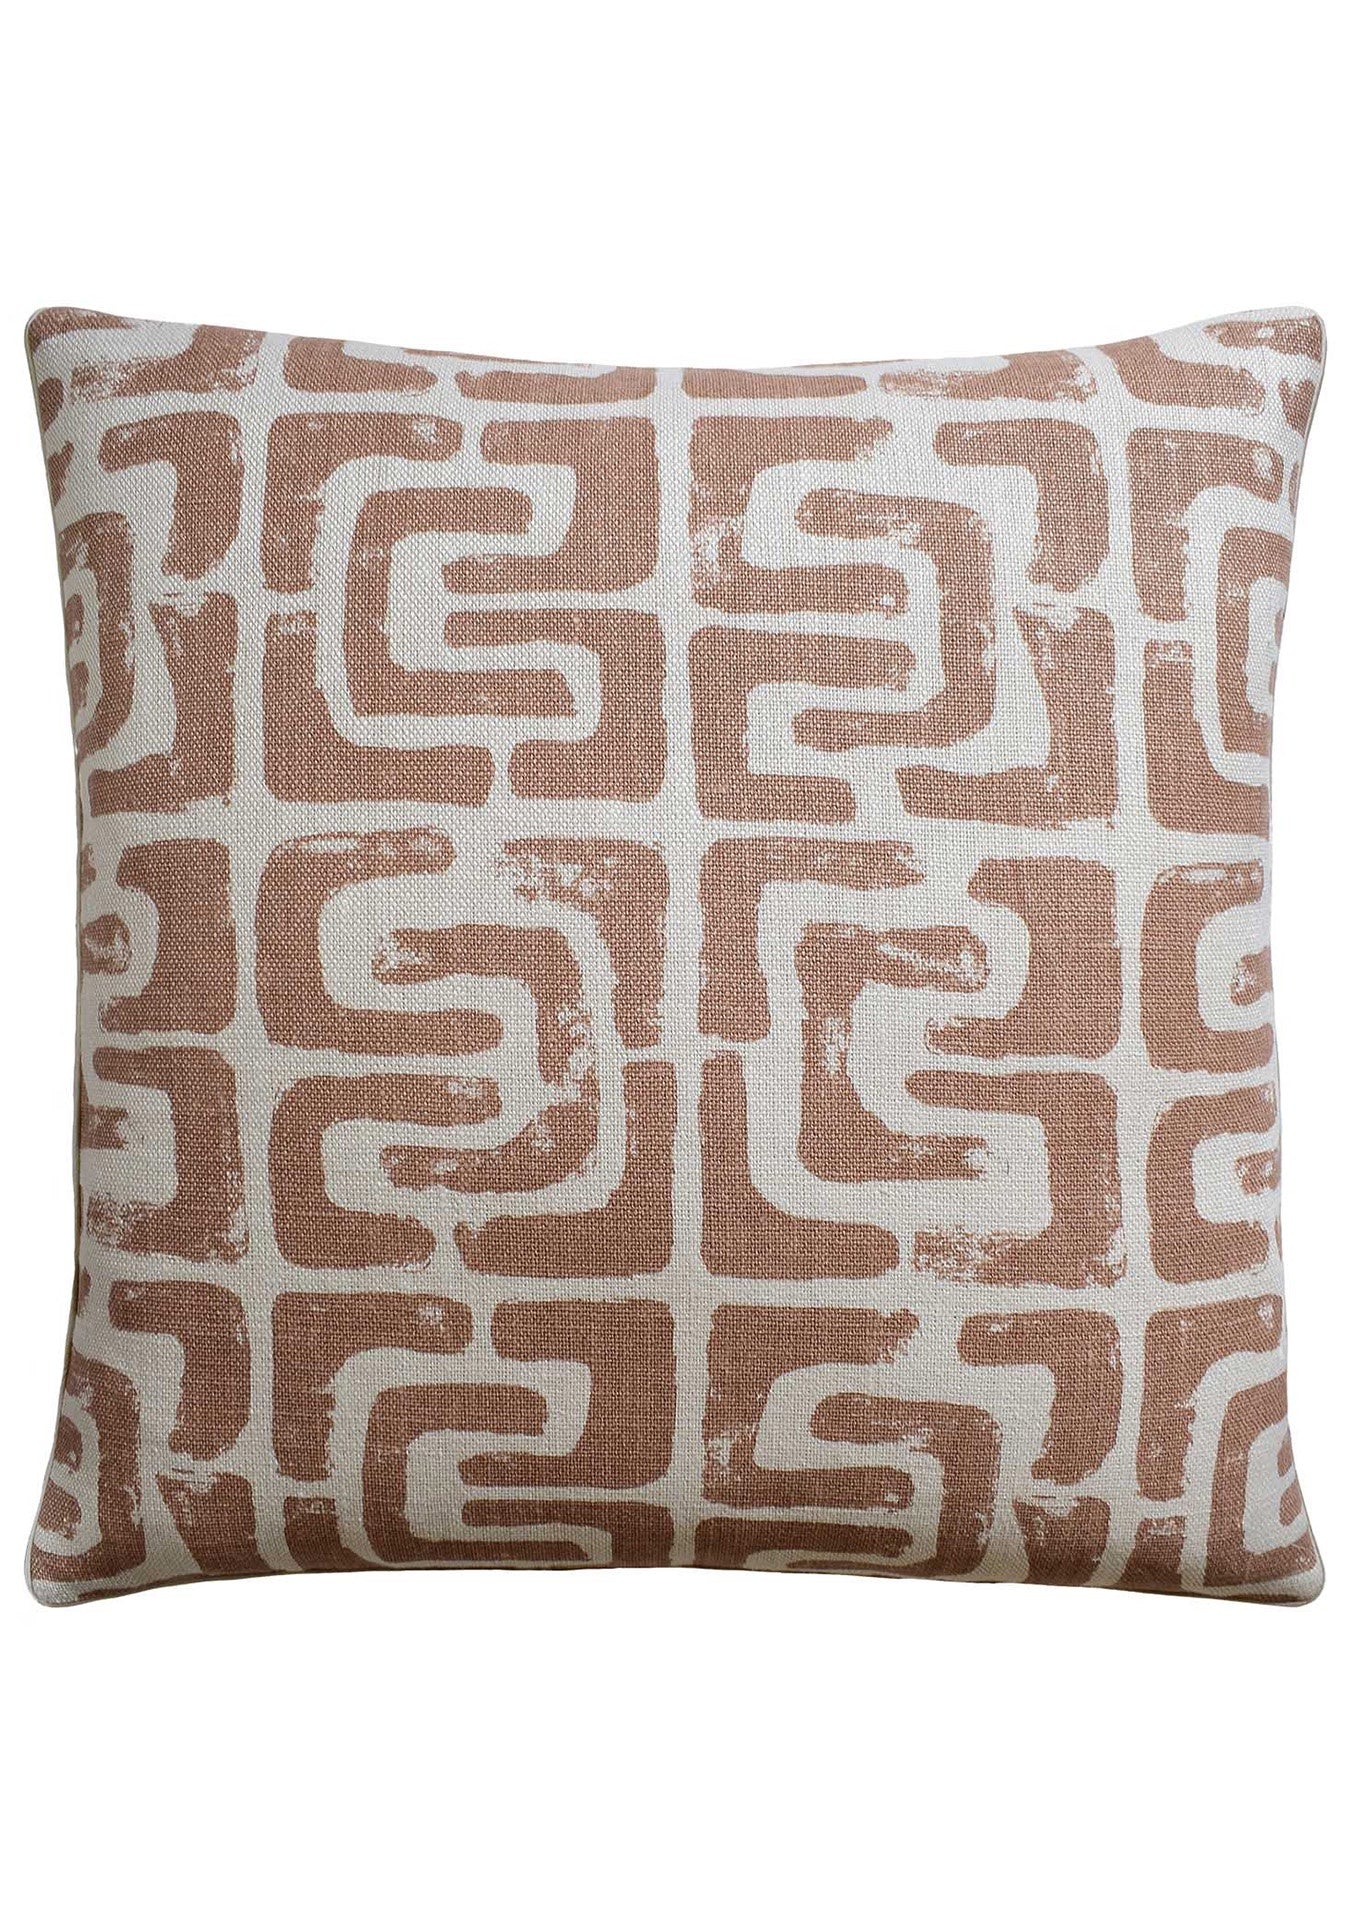 Decorative pillow featuring a geometric pattern in shades of taupe and off-white. The design is abstract with interconnected shapes on a rectangular cushion, perfect for any Scottsdale bungalow. Introducing the Oui Mesa 22x22" by Ryan Studio.